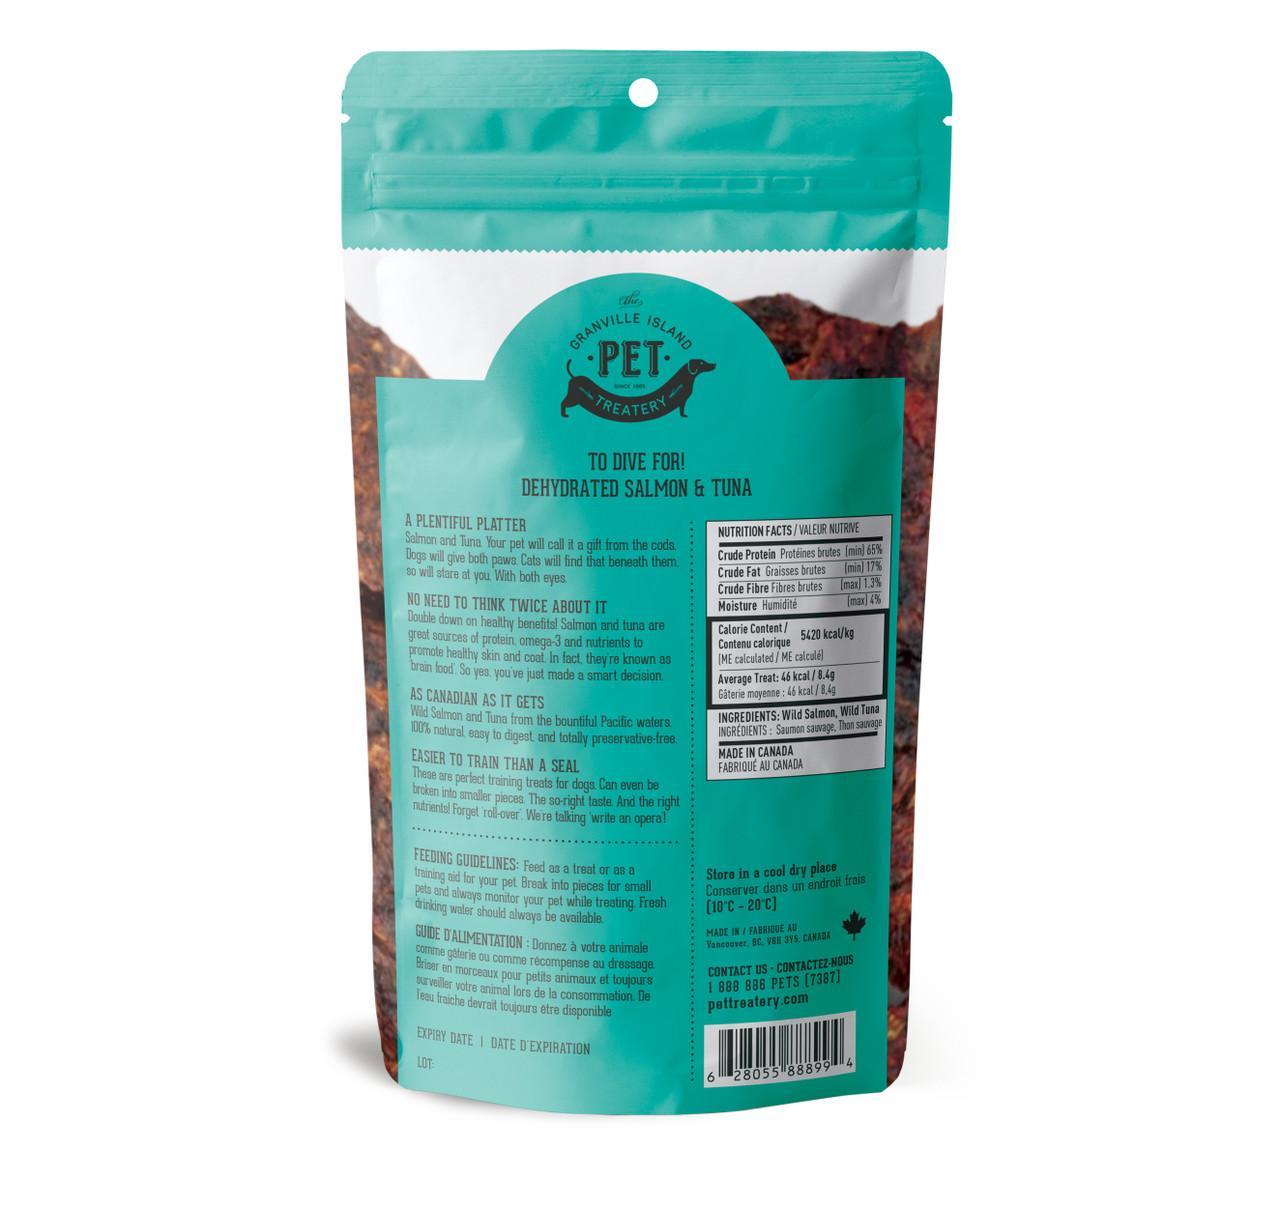 The Granville Island Pet Treatery To Dive For! Wild Salmon & Tuna Dehydrated Dog & Cat Treats, 90-gram (Size: 90-gram)